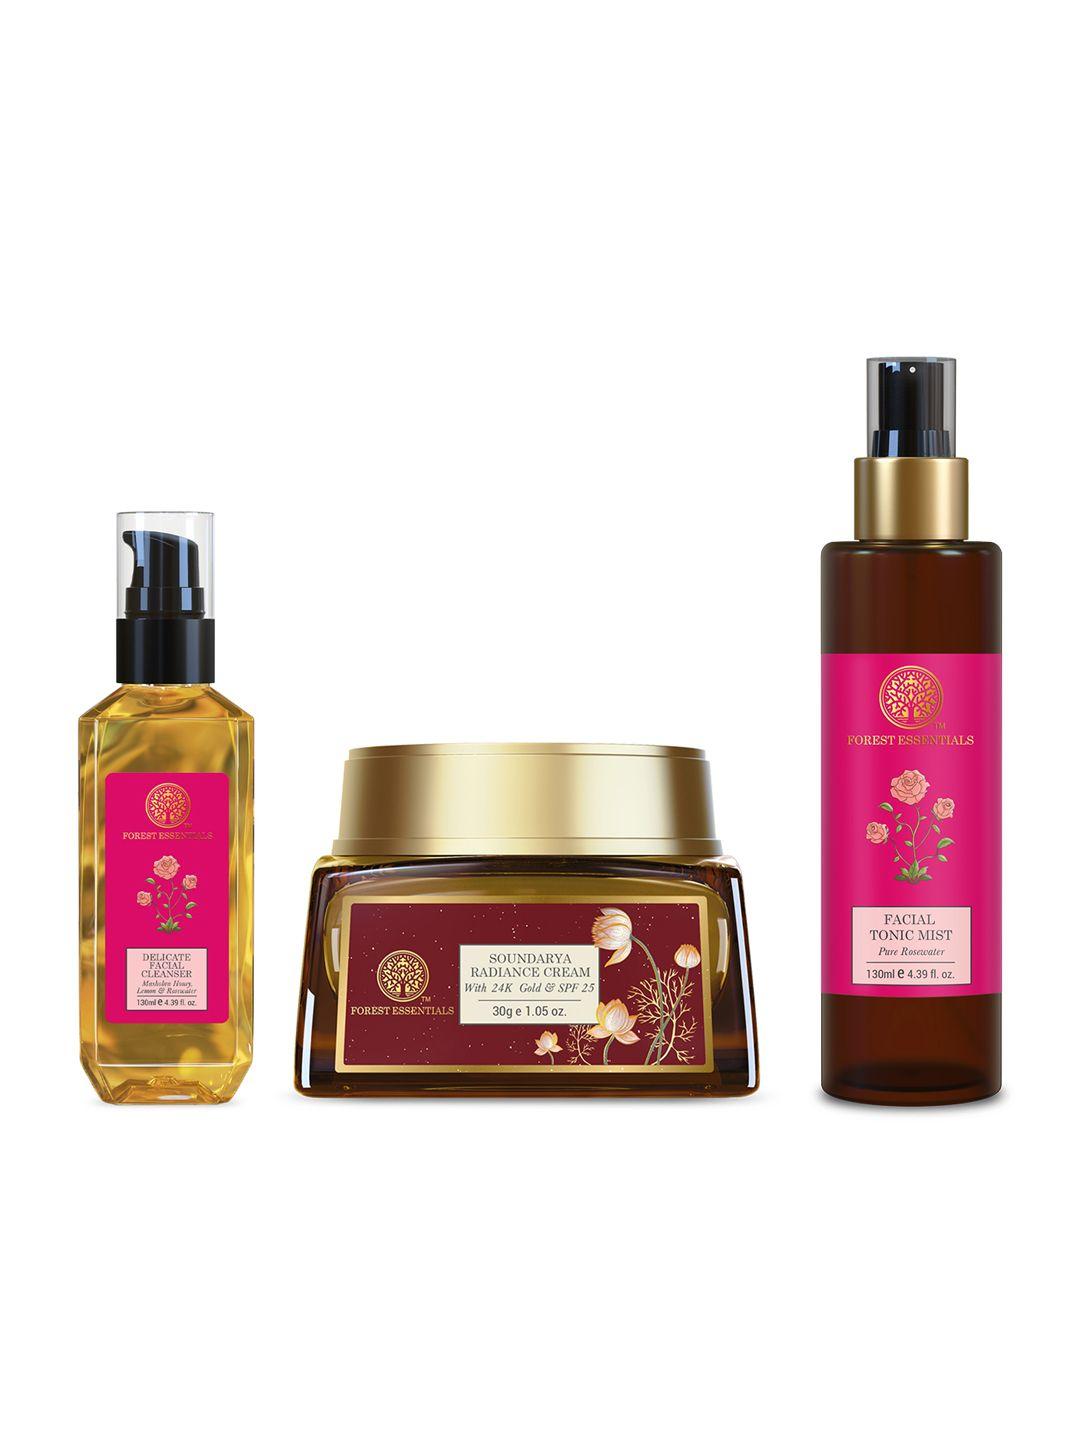 forest essentials set of 3 daily skin care ritual for ageing